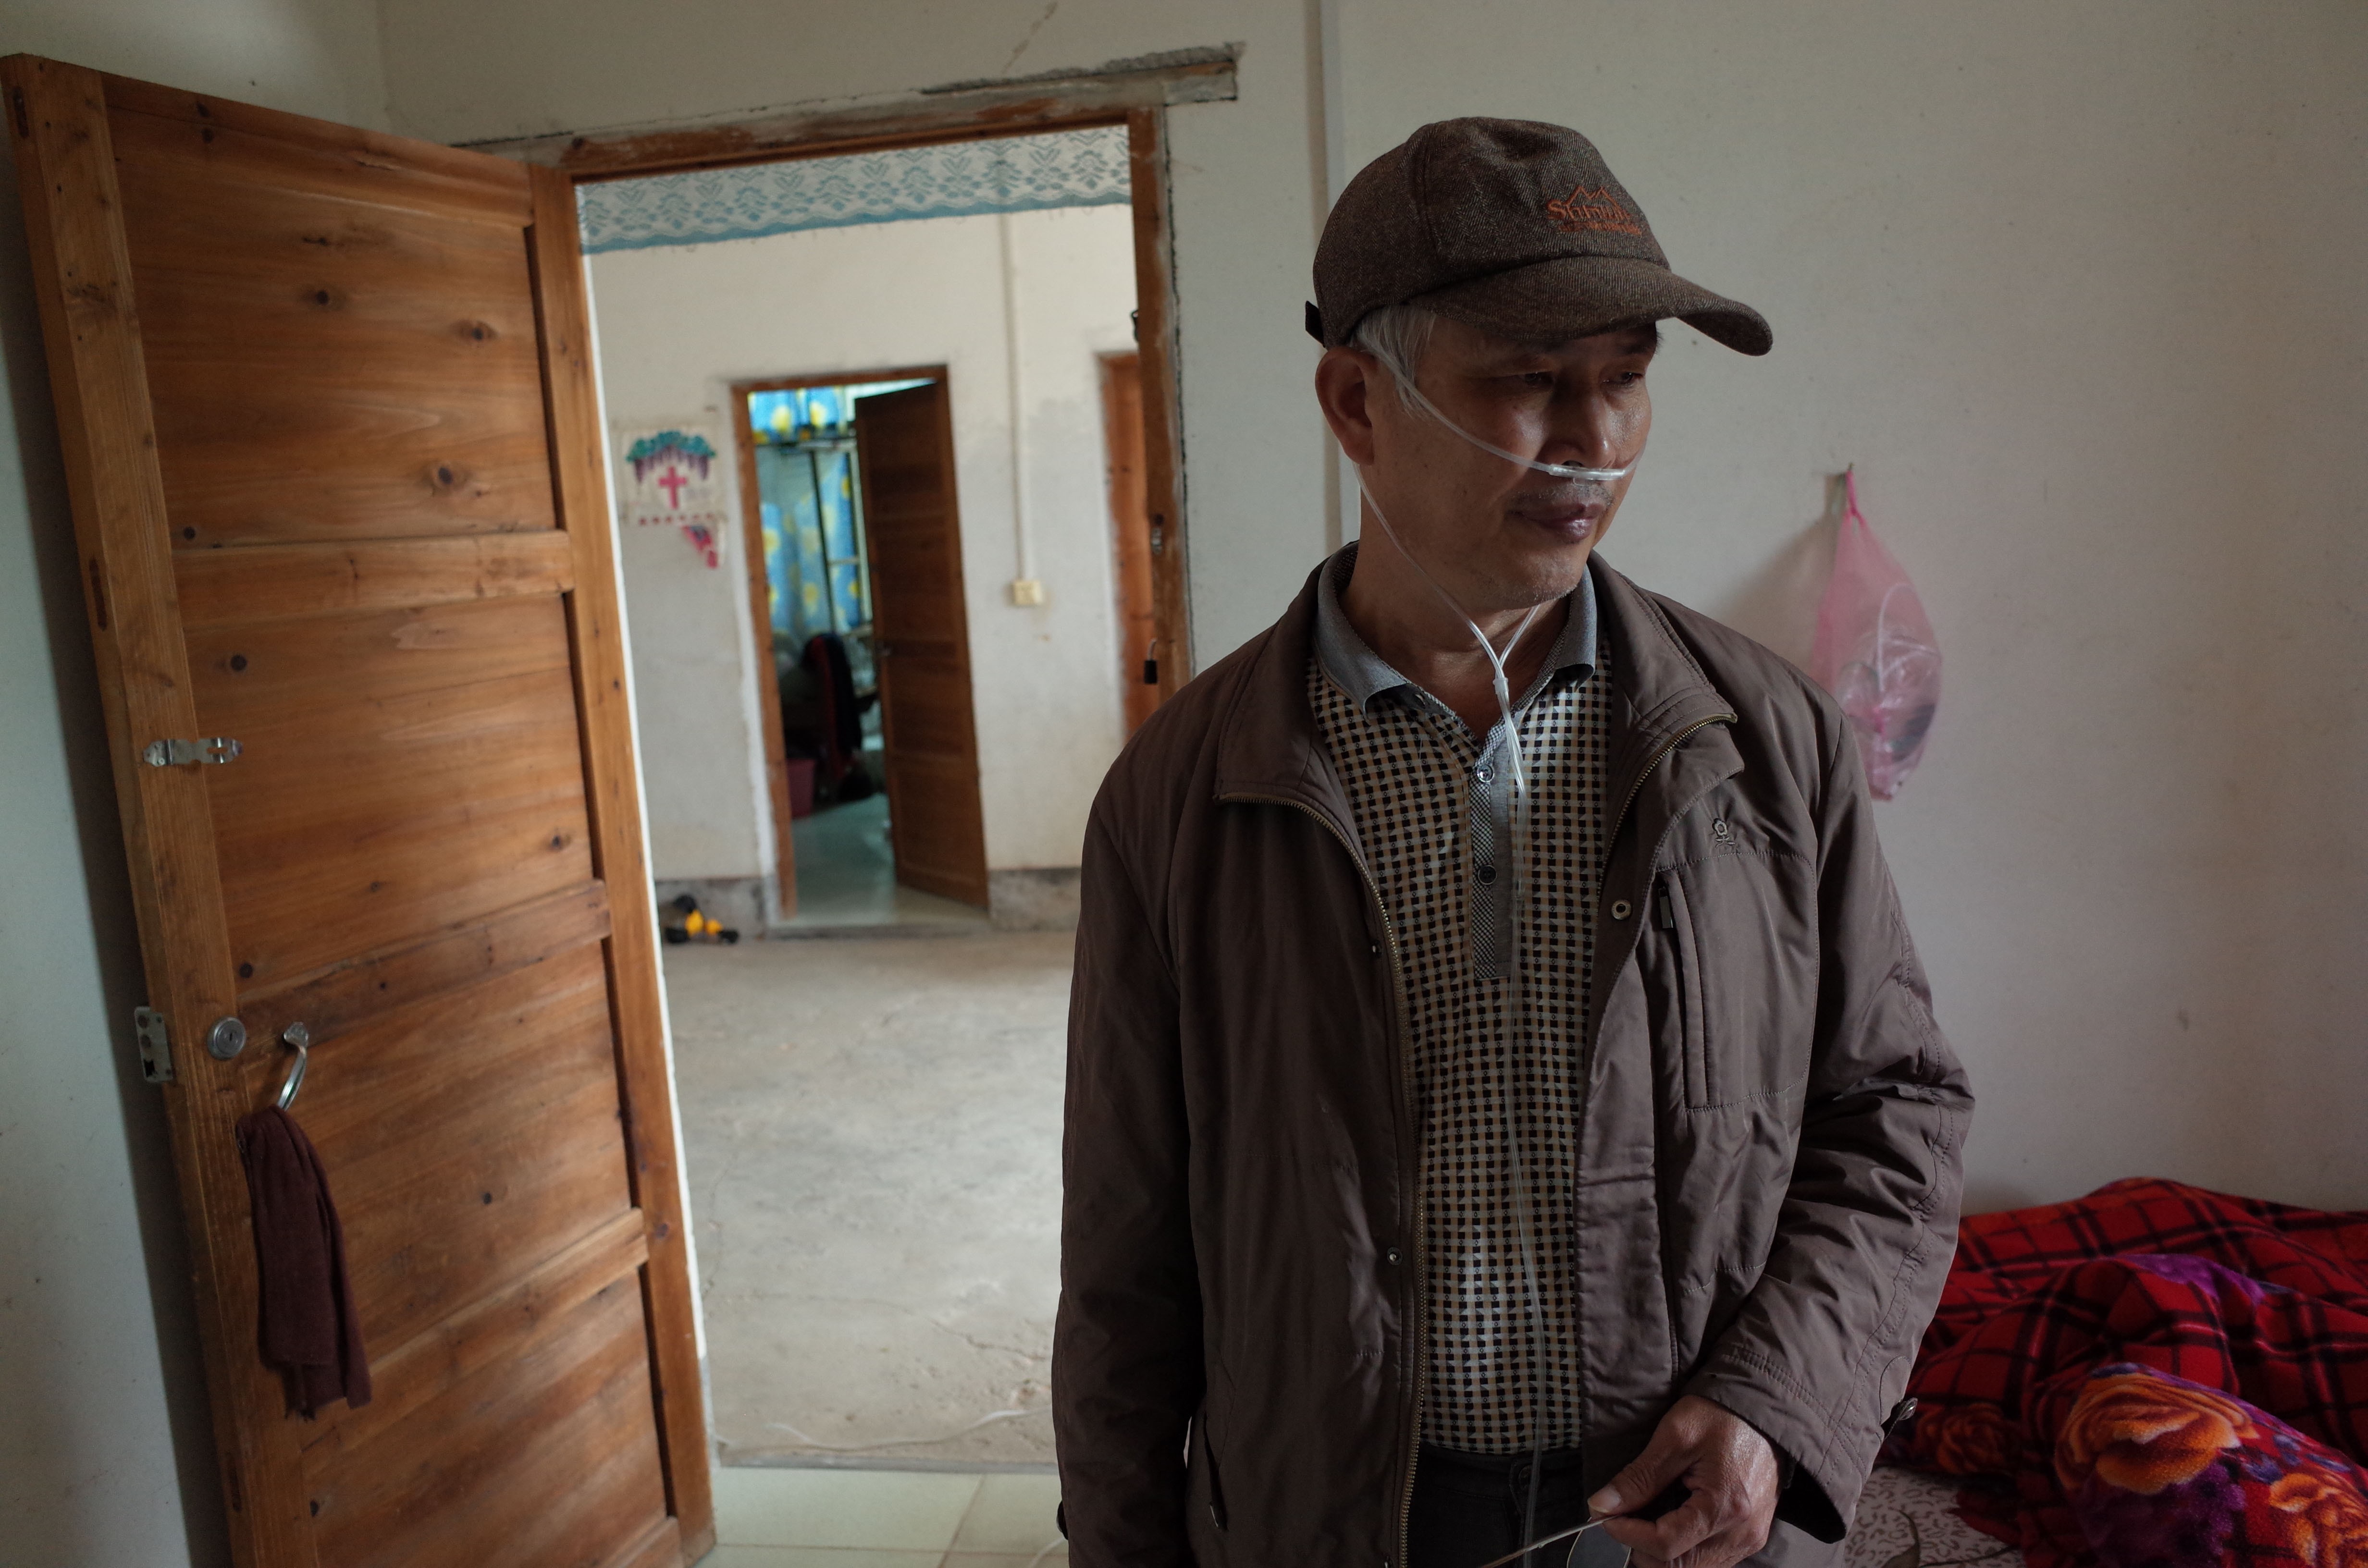 Wang Quanlong, one of about 80 sick drillers who threatened mass suicide if Shenzhen authorities did not pay compensation for pneumoconiosis. Photo: Washington Post photo by Gerry Shih